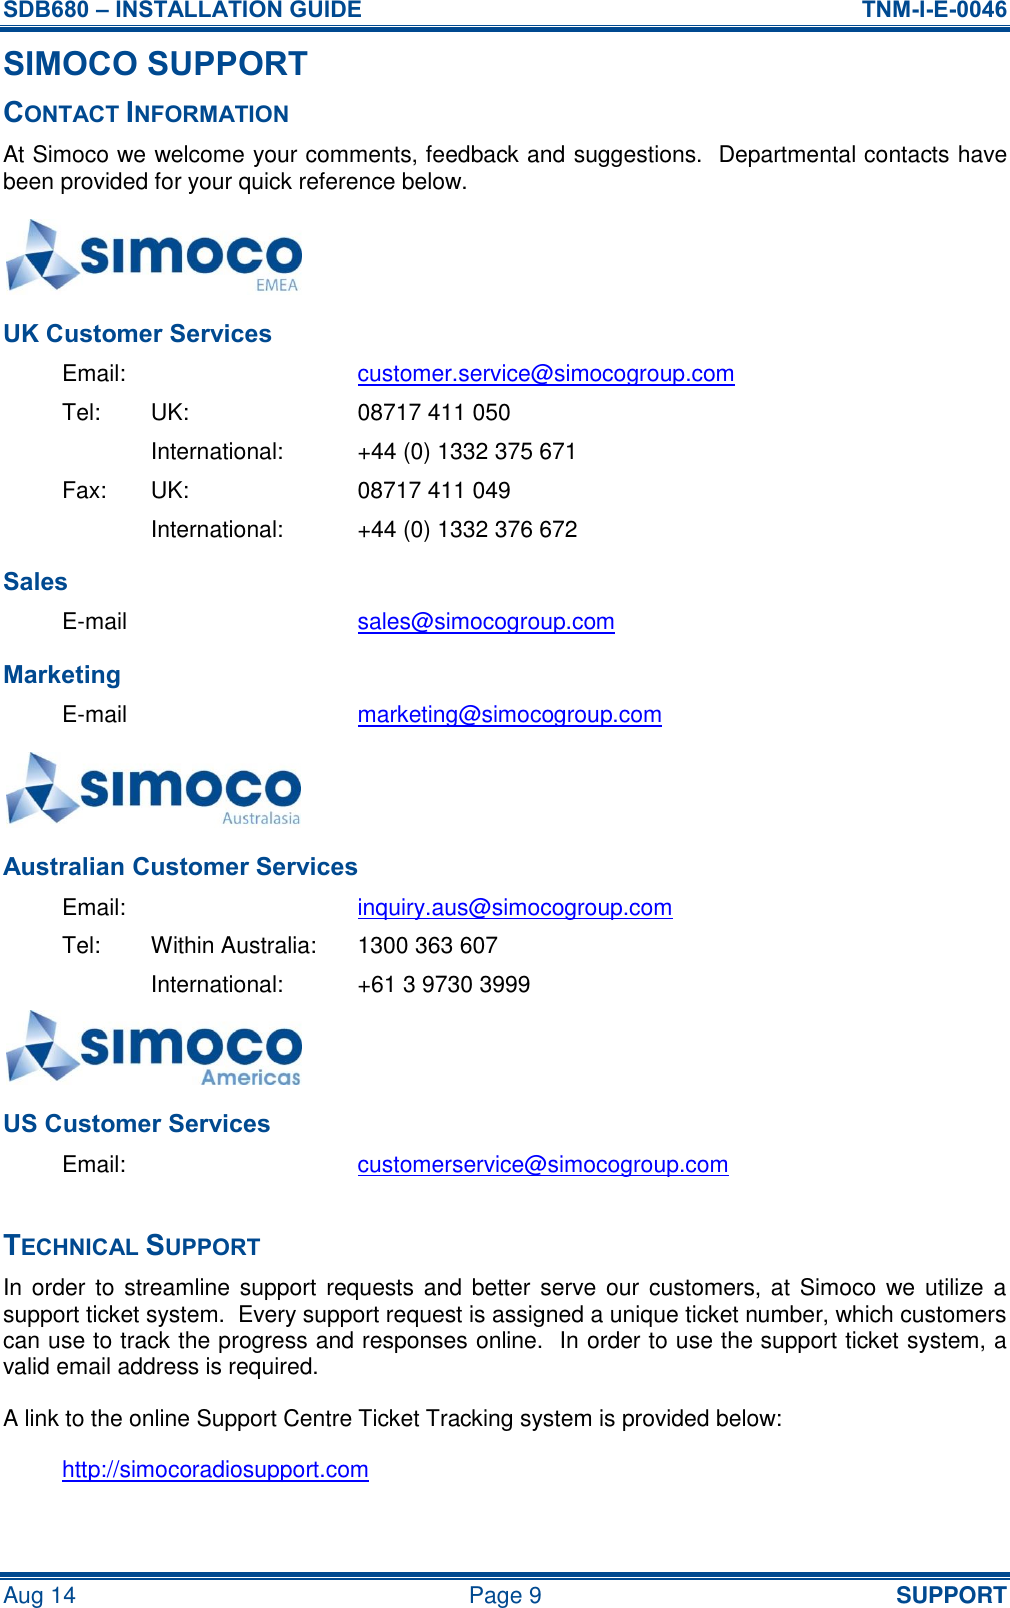 SDB680 – INSTALLATION GUIDE  TNM-I-E-0046 Aug 14  Page 9  SUPPORT SIMOCO SUPPORT CONTACT INFORMATION At Simoco we welcome your comments, feedback and suggestions.  Departmental contacts have been provided for your quick reference below.  UK Customer Services Email:  customer.service@simocogroup.com Tel:  UK:  08717 411 050   International:  +44 (0) 1332 375 671 Fax:  UK:  08717 411 049   International:  +44 (0) 1332 376 672 Sales E-mail  sales@simocogroup.com Marketing E-mail  marketing@simocogroup.com  Australian Customer Services Email:  inquiry.aus@simocogroup.com Tel:  Within Australia:  1300 363 607   International:  +61 3 9730 3999  US Customer Services Email:  customerservice@simocogroup.com  TECHNICAL SUPPORT In order to  streamline support requests and better serve our customers, at  Simoco we utilize  a support ticket system.  Every support request is assigned a unique ticket number, which customers can use to track the progress and responses online.  In order to use the support ticket system, a valid email address is required. A link to the online Support Centre Ticket Tracking system is provided below: http://simocoradiosupport.com 